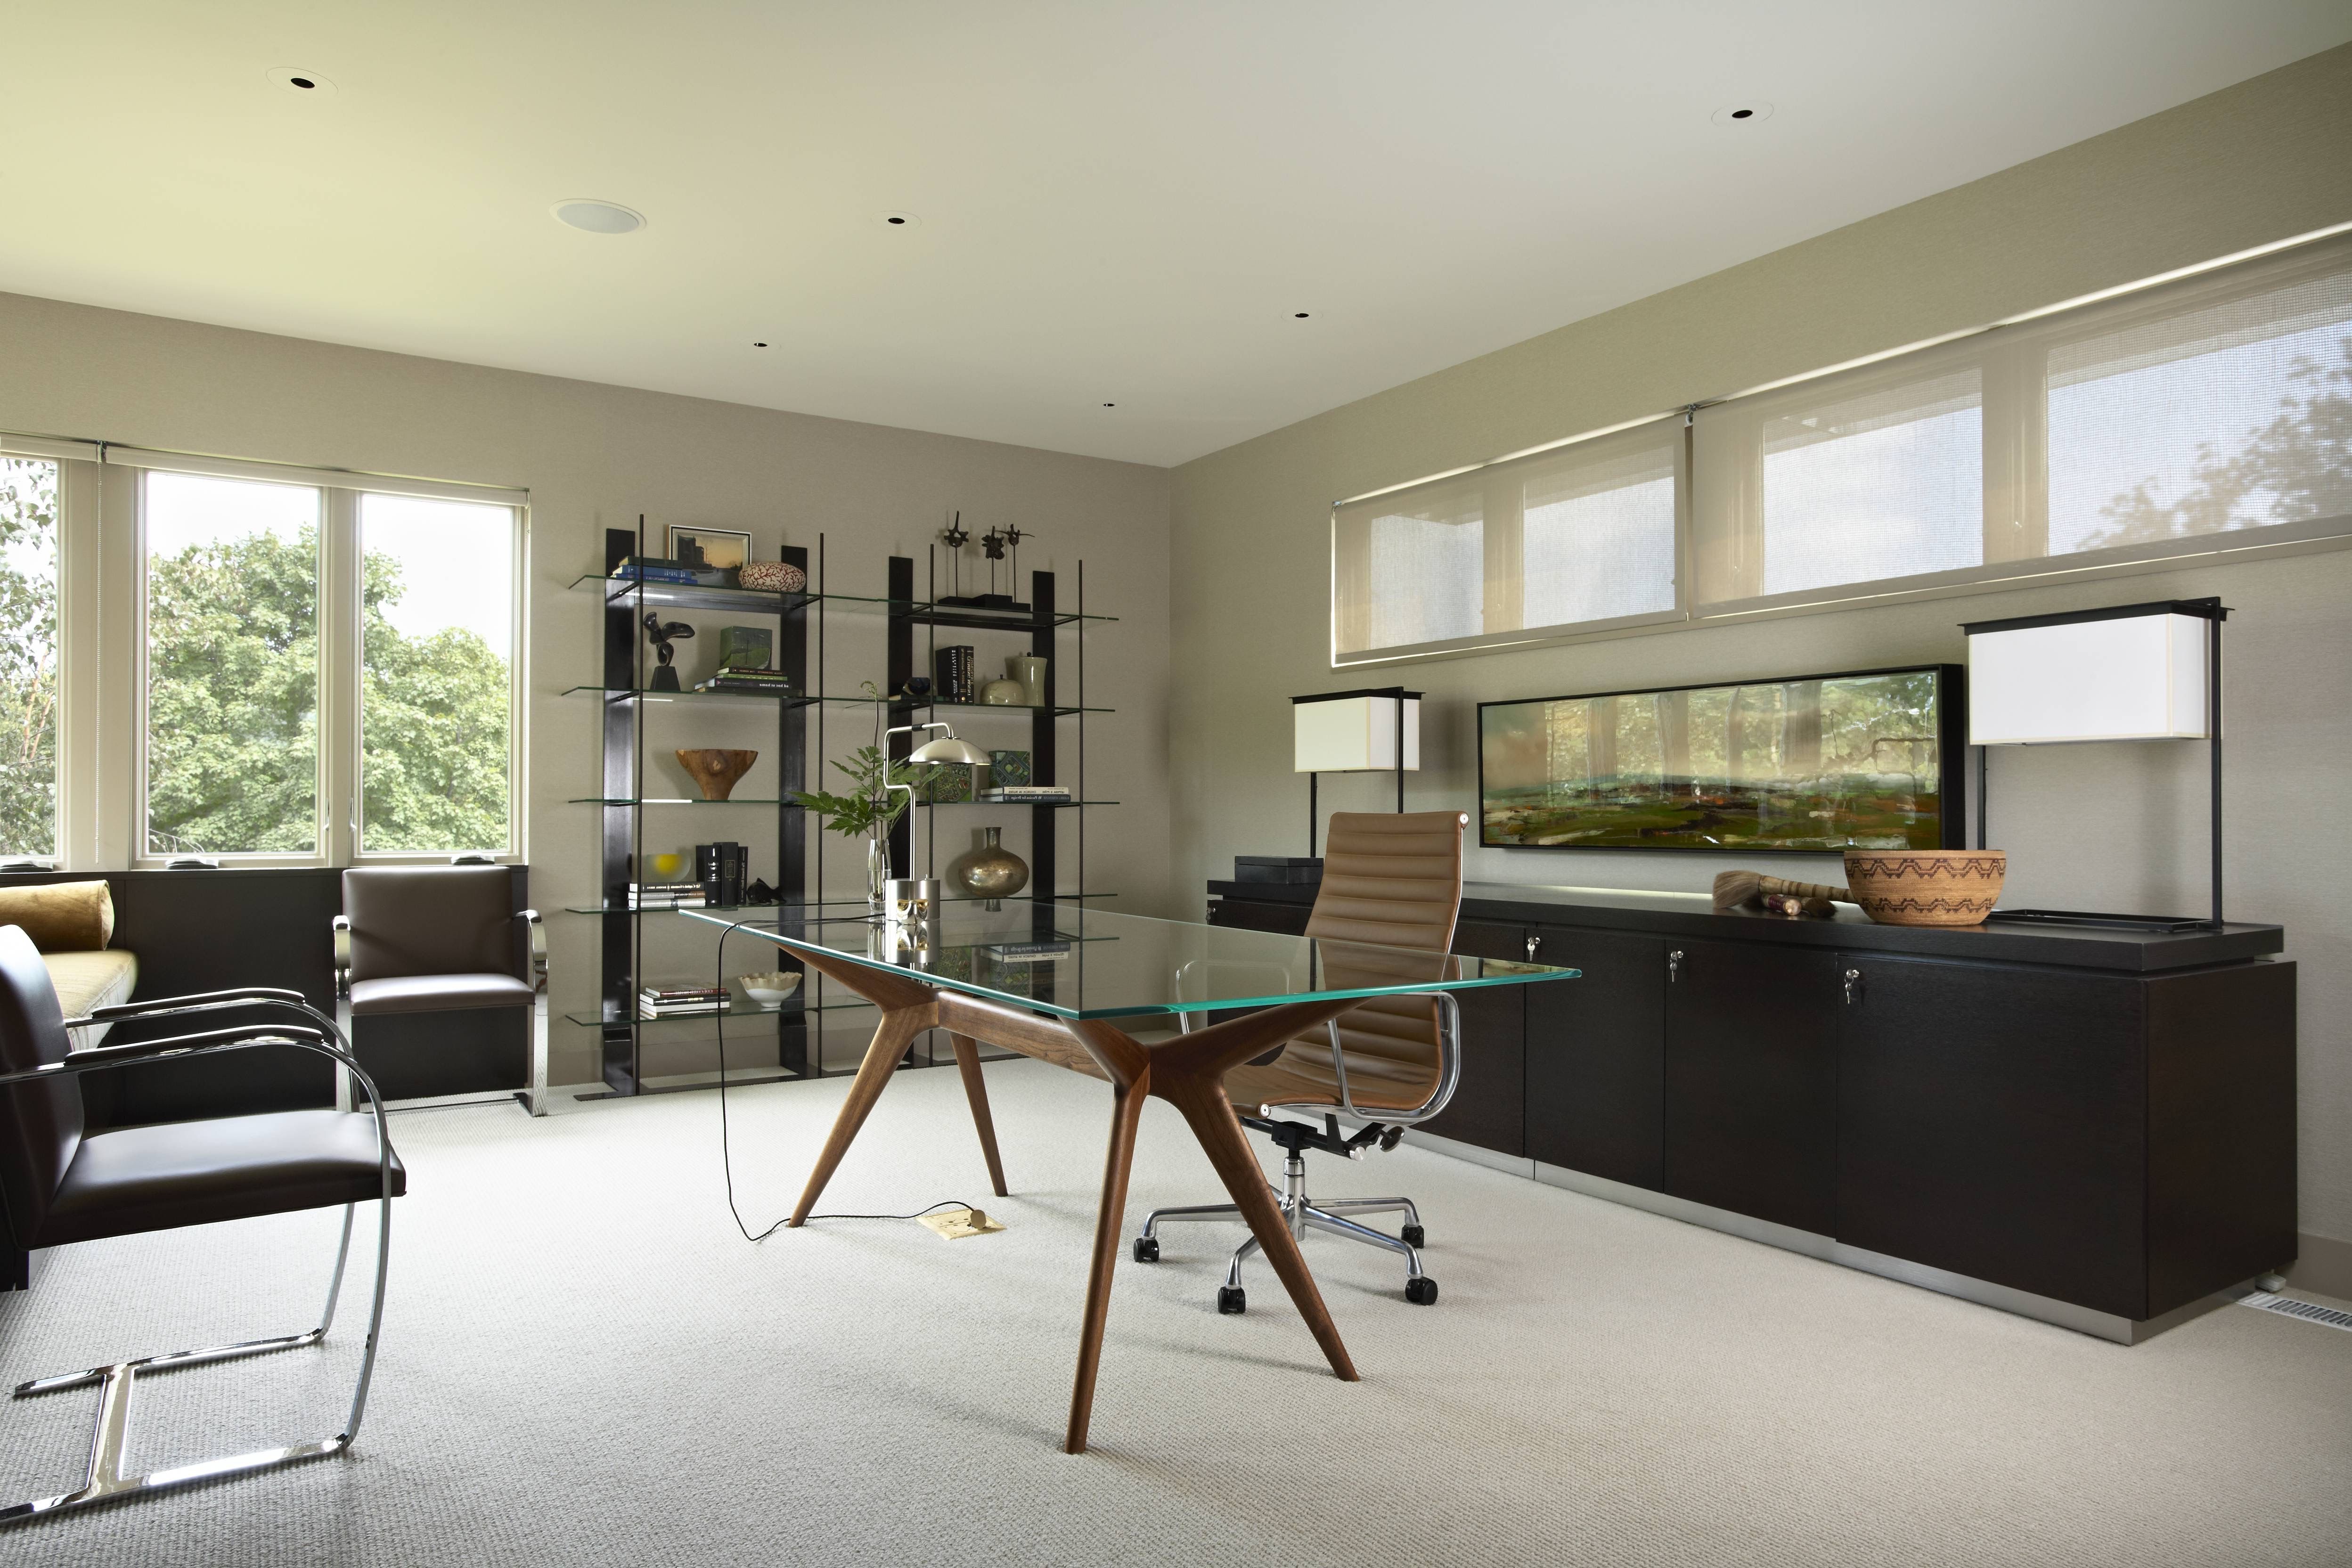 Contemporary Home Office In Minimalist Style (View 1 of 17)